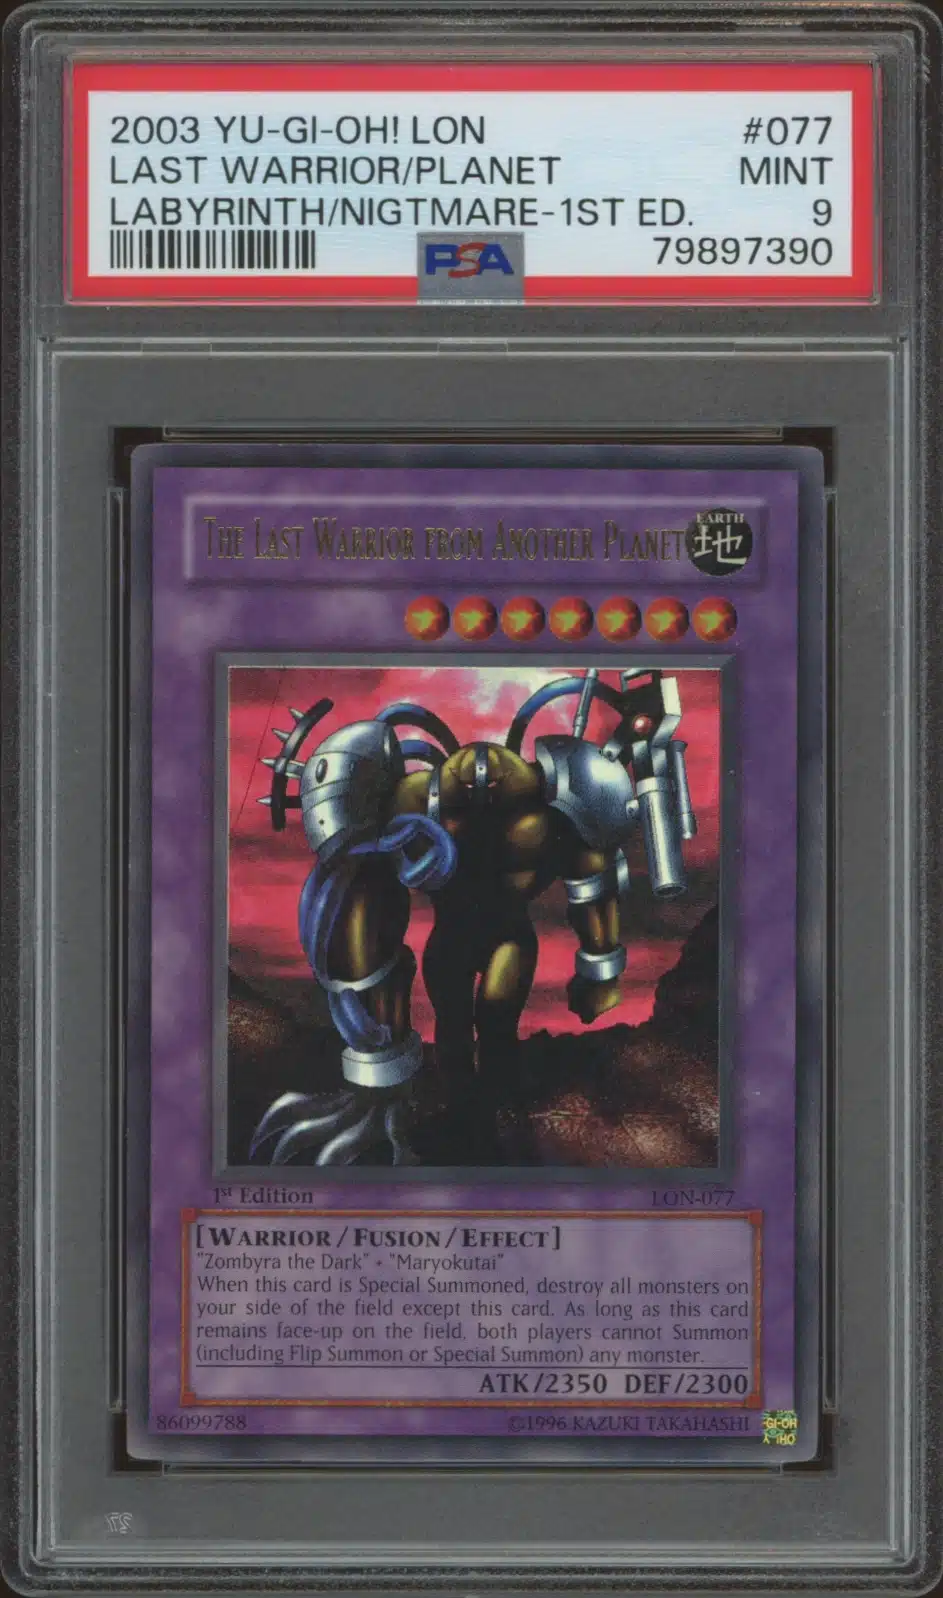 2003 Yu-Gi-Oh! Labyrinth of Nightmare (1st Edition) The Last Warrior From Another Planet #LON-077 (PSA 9) (Front)